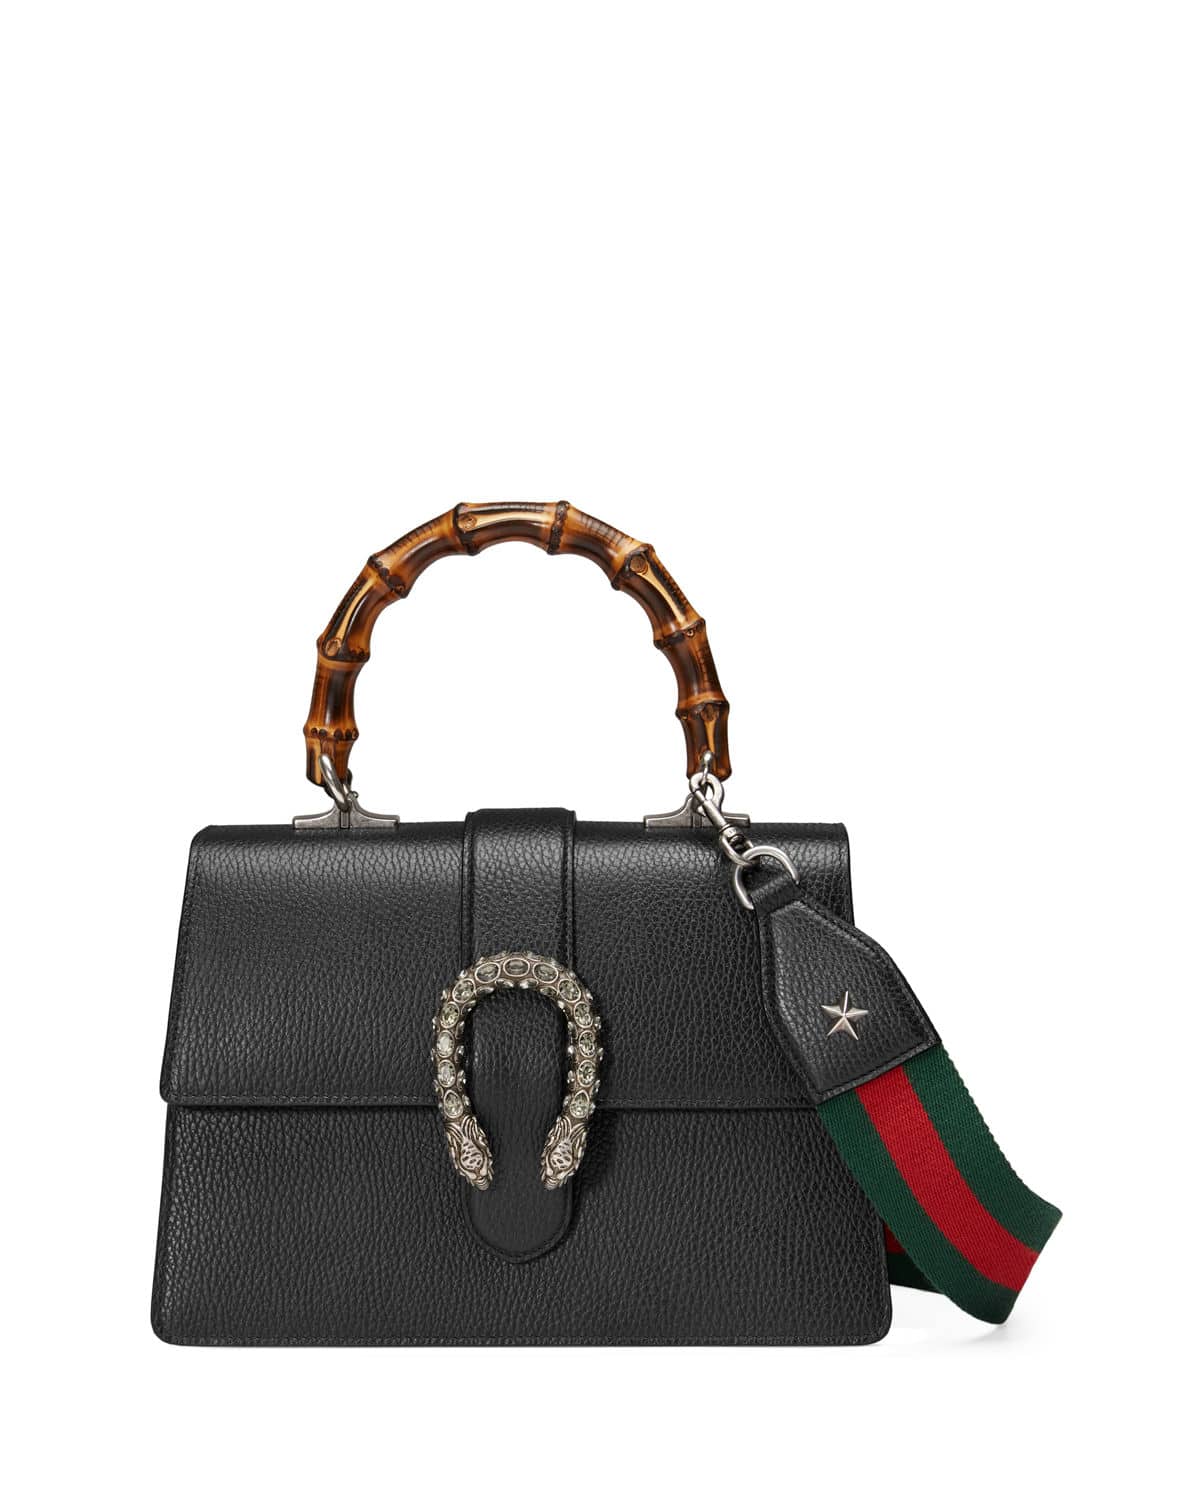 Gucci Resort 2017 Bag Collection - Spotted Fashion